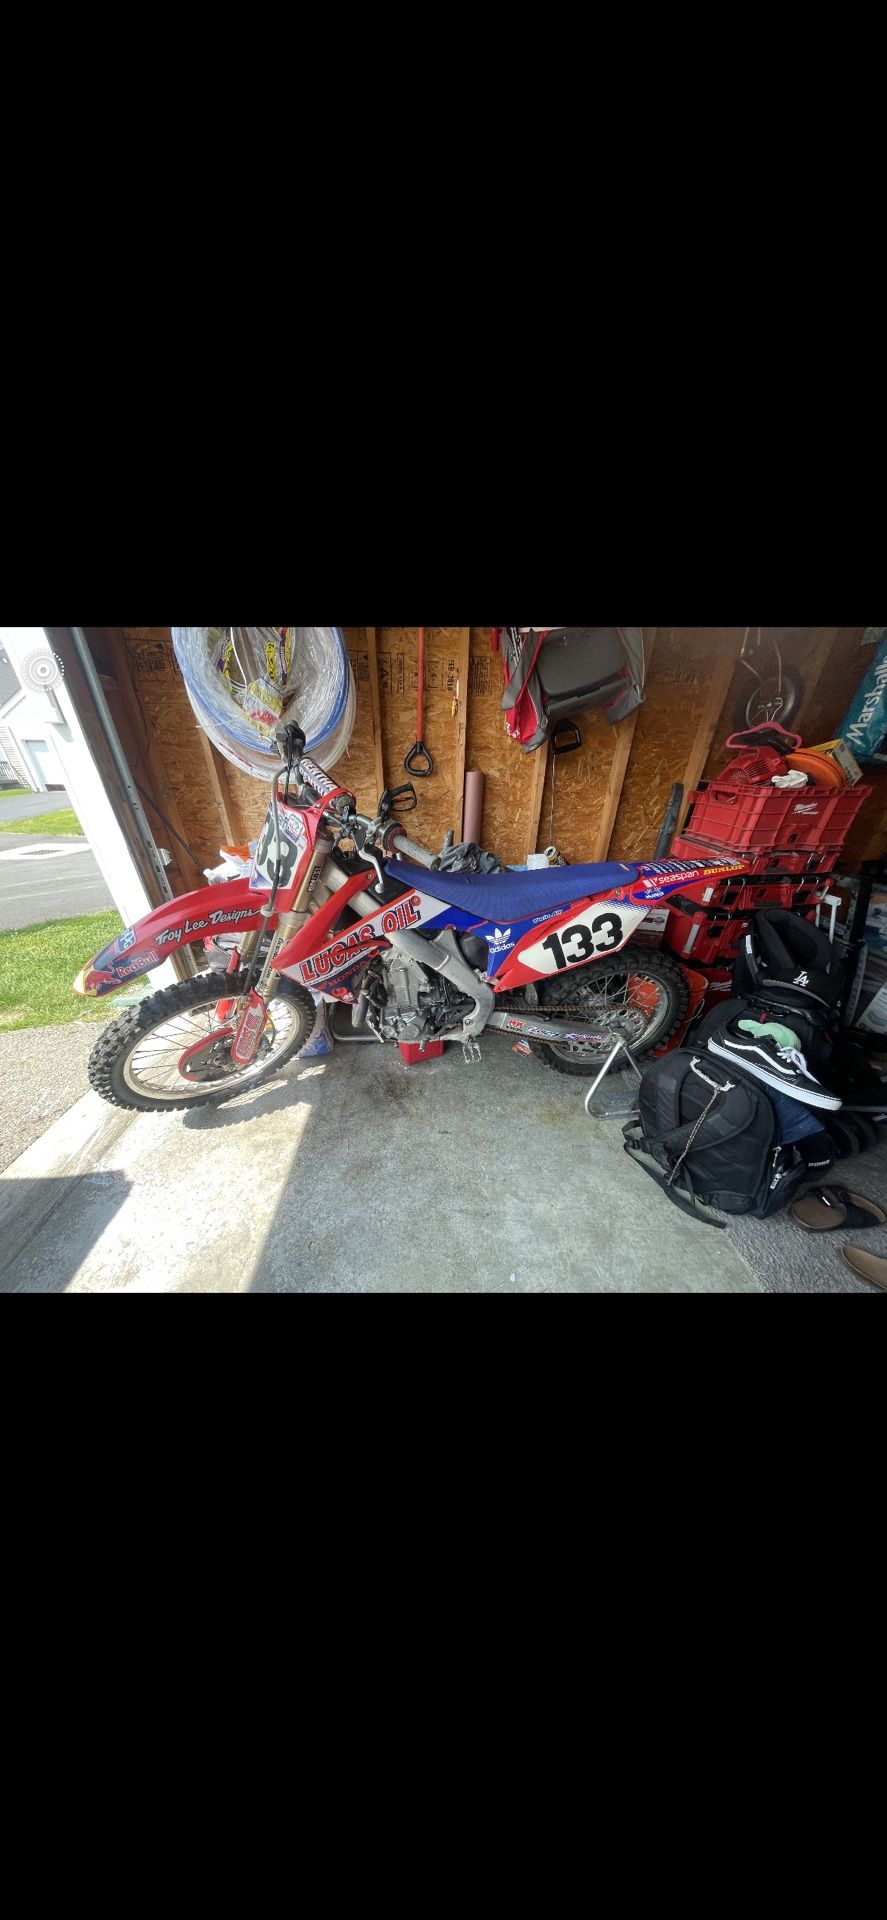 2009 yamaha 450 crf fuel injected  serviced front shocks july  a lot of upgrades and extras 